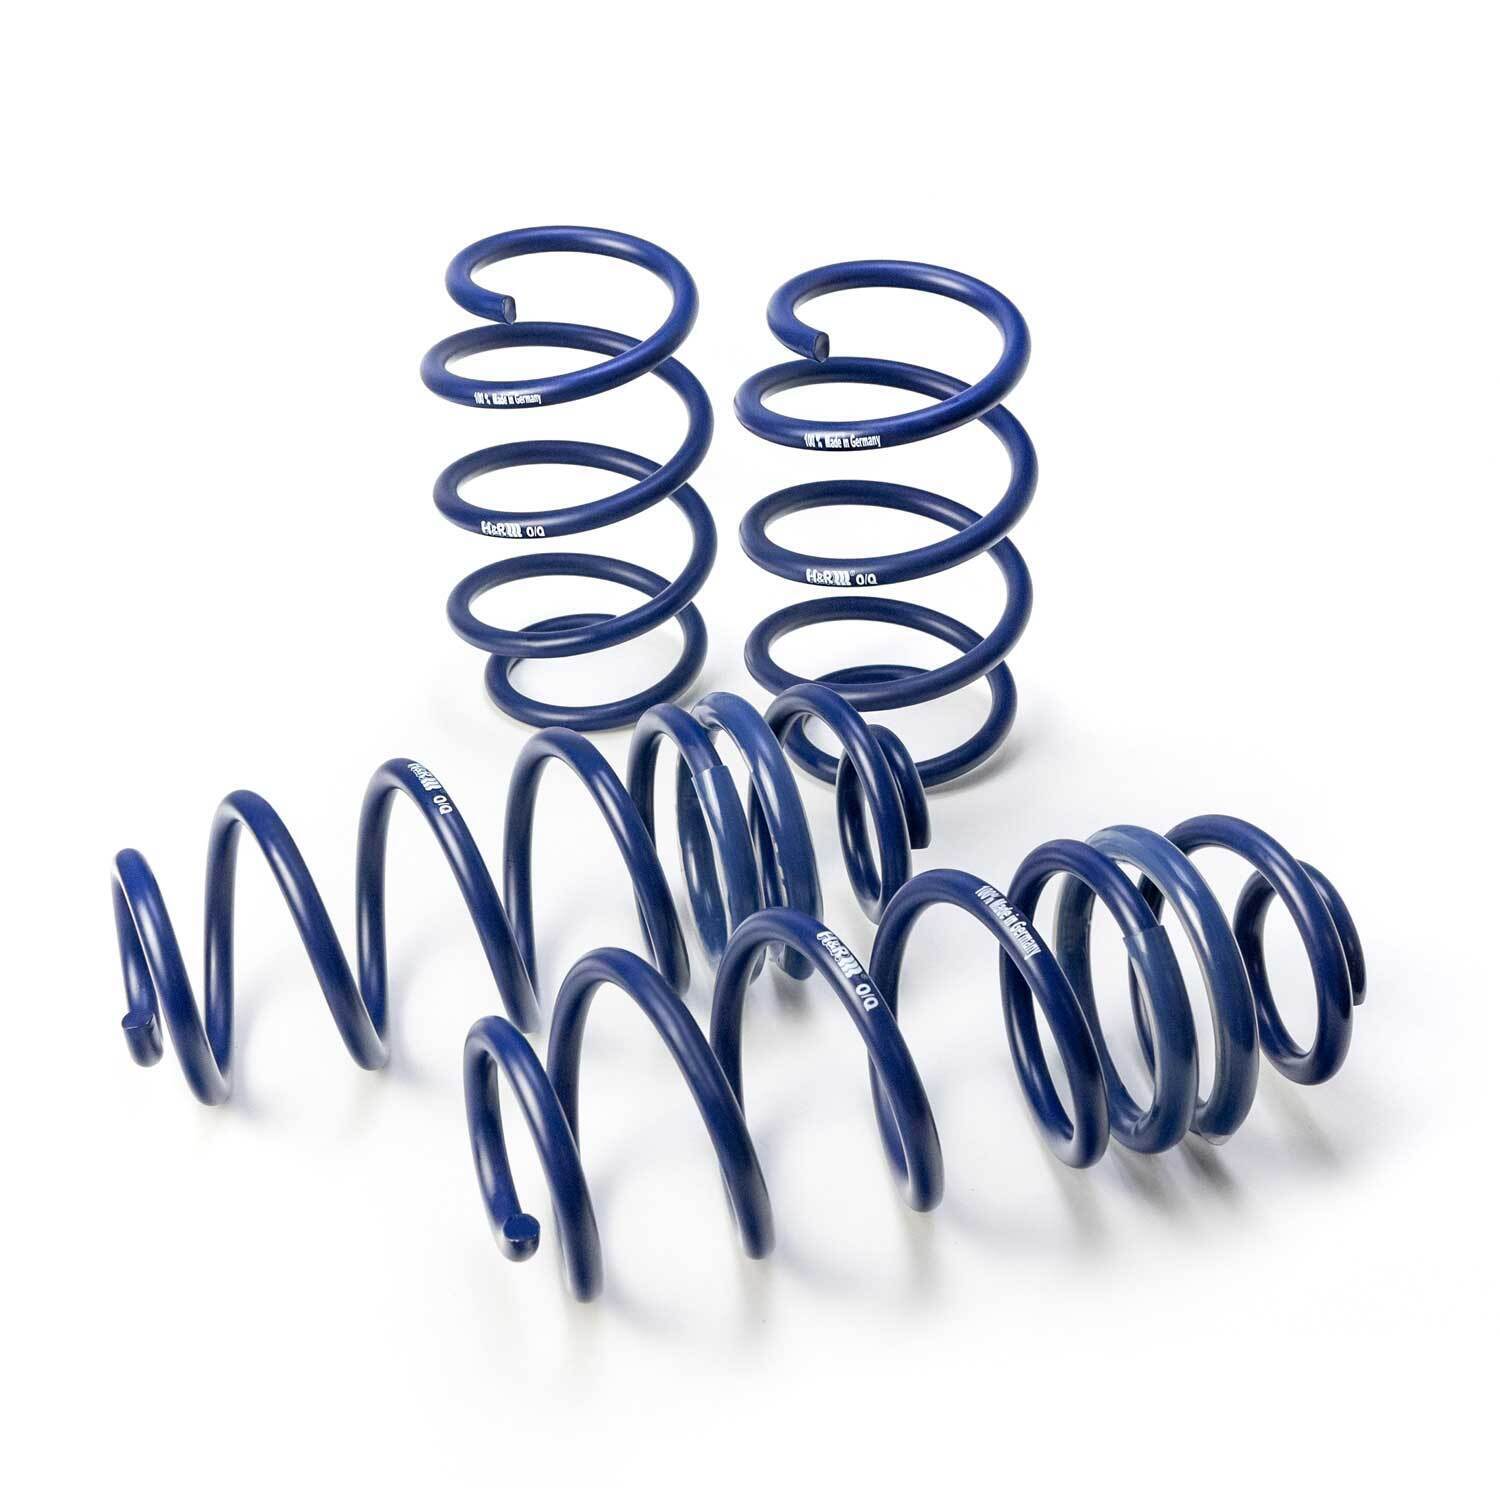 H&R lowering springs 29119-1 fits BMW Z 4 M-Roadster+ M-Coupé (E86) sport spring